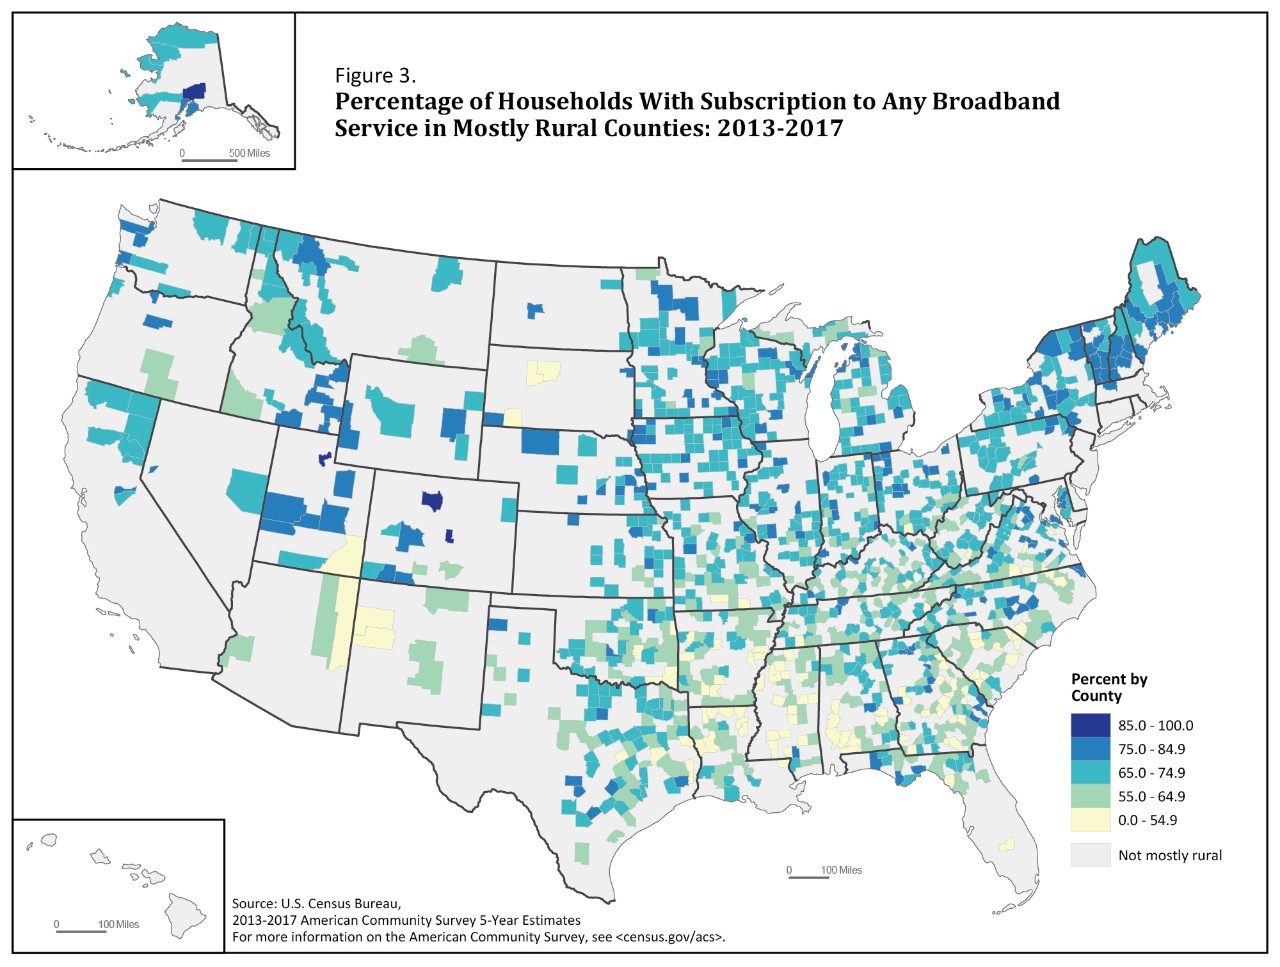 Figure 3. Percentage of Households With Subscription to Any Broadband Service in Mostly Rural Counties: 2013-2017